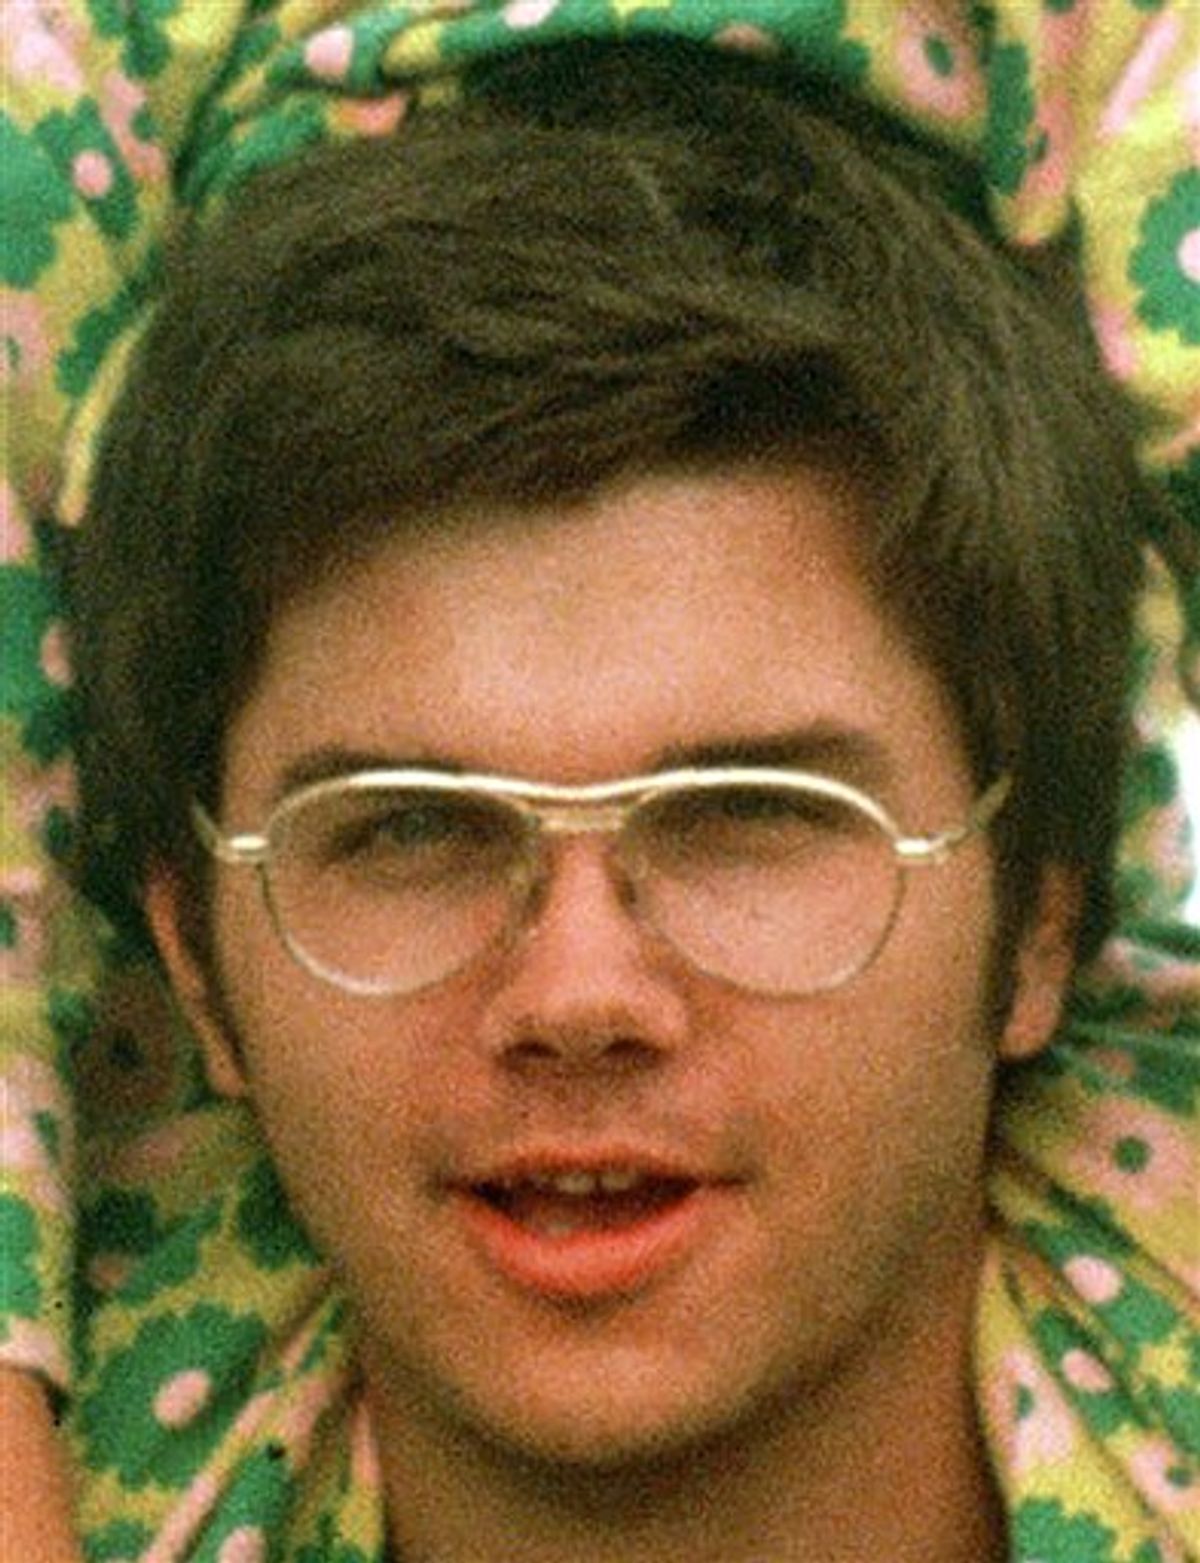 FILE - In this 1975 file photo, Mark David Chapman is seen at Fort Chaffee near Fort Smith, Ark. John Lennon's killer will seek his freedom for a sixth time in an interview before a parole board as early as Tuesday, Aug. 10, 2010. A parole hearing for Chapman, now 55, is scheduled at Attica Correctional Facility, the upstate New York prison where he has been held for nearly 30 years. Lennon's widow, Yoko Ono, continues to oppose Chapman's release. (AP Photo/Greg Lyuan, File)  (AP)